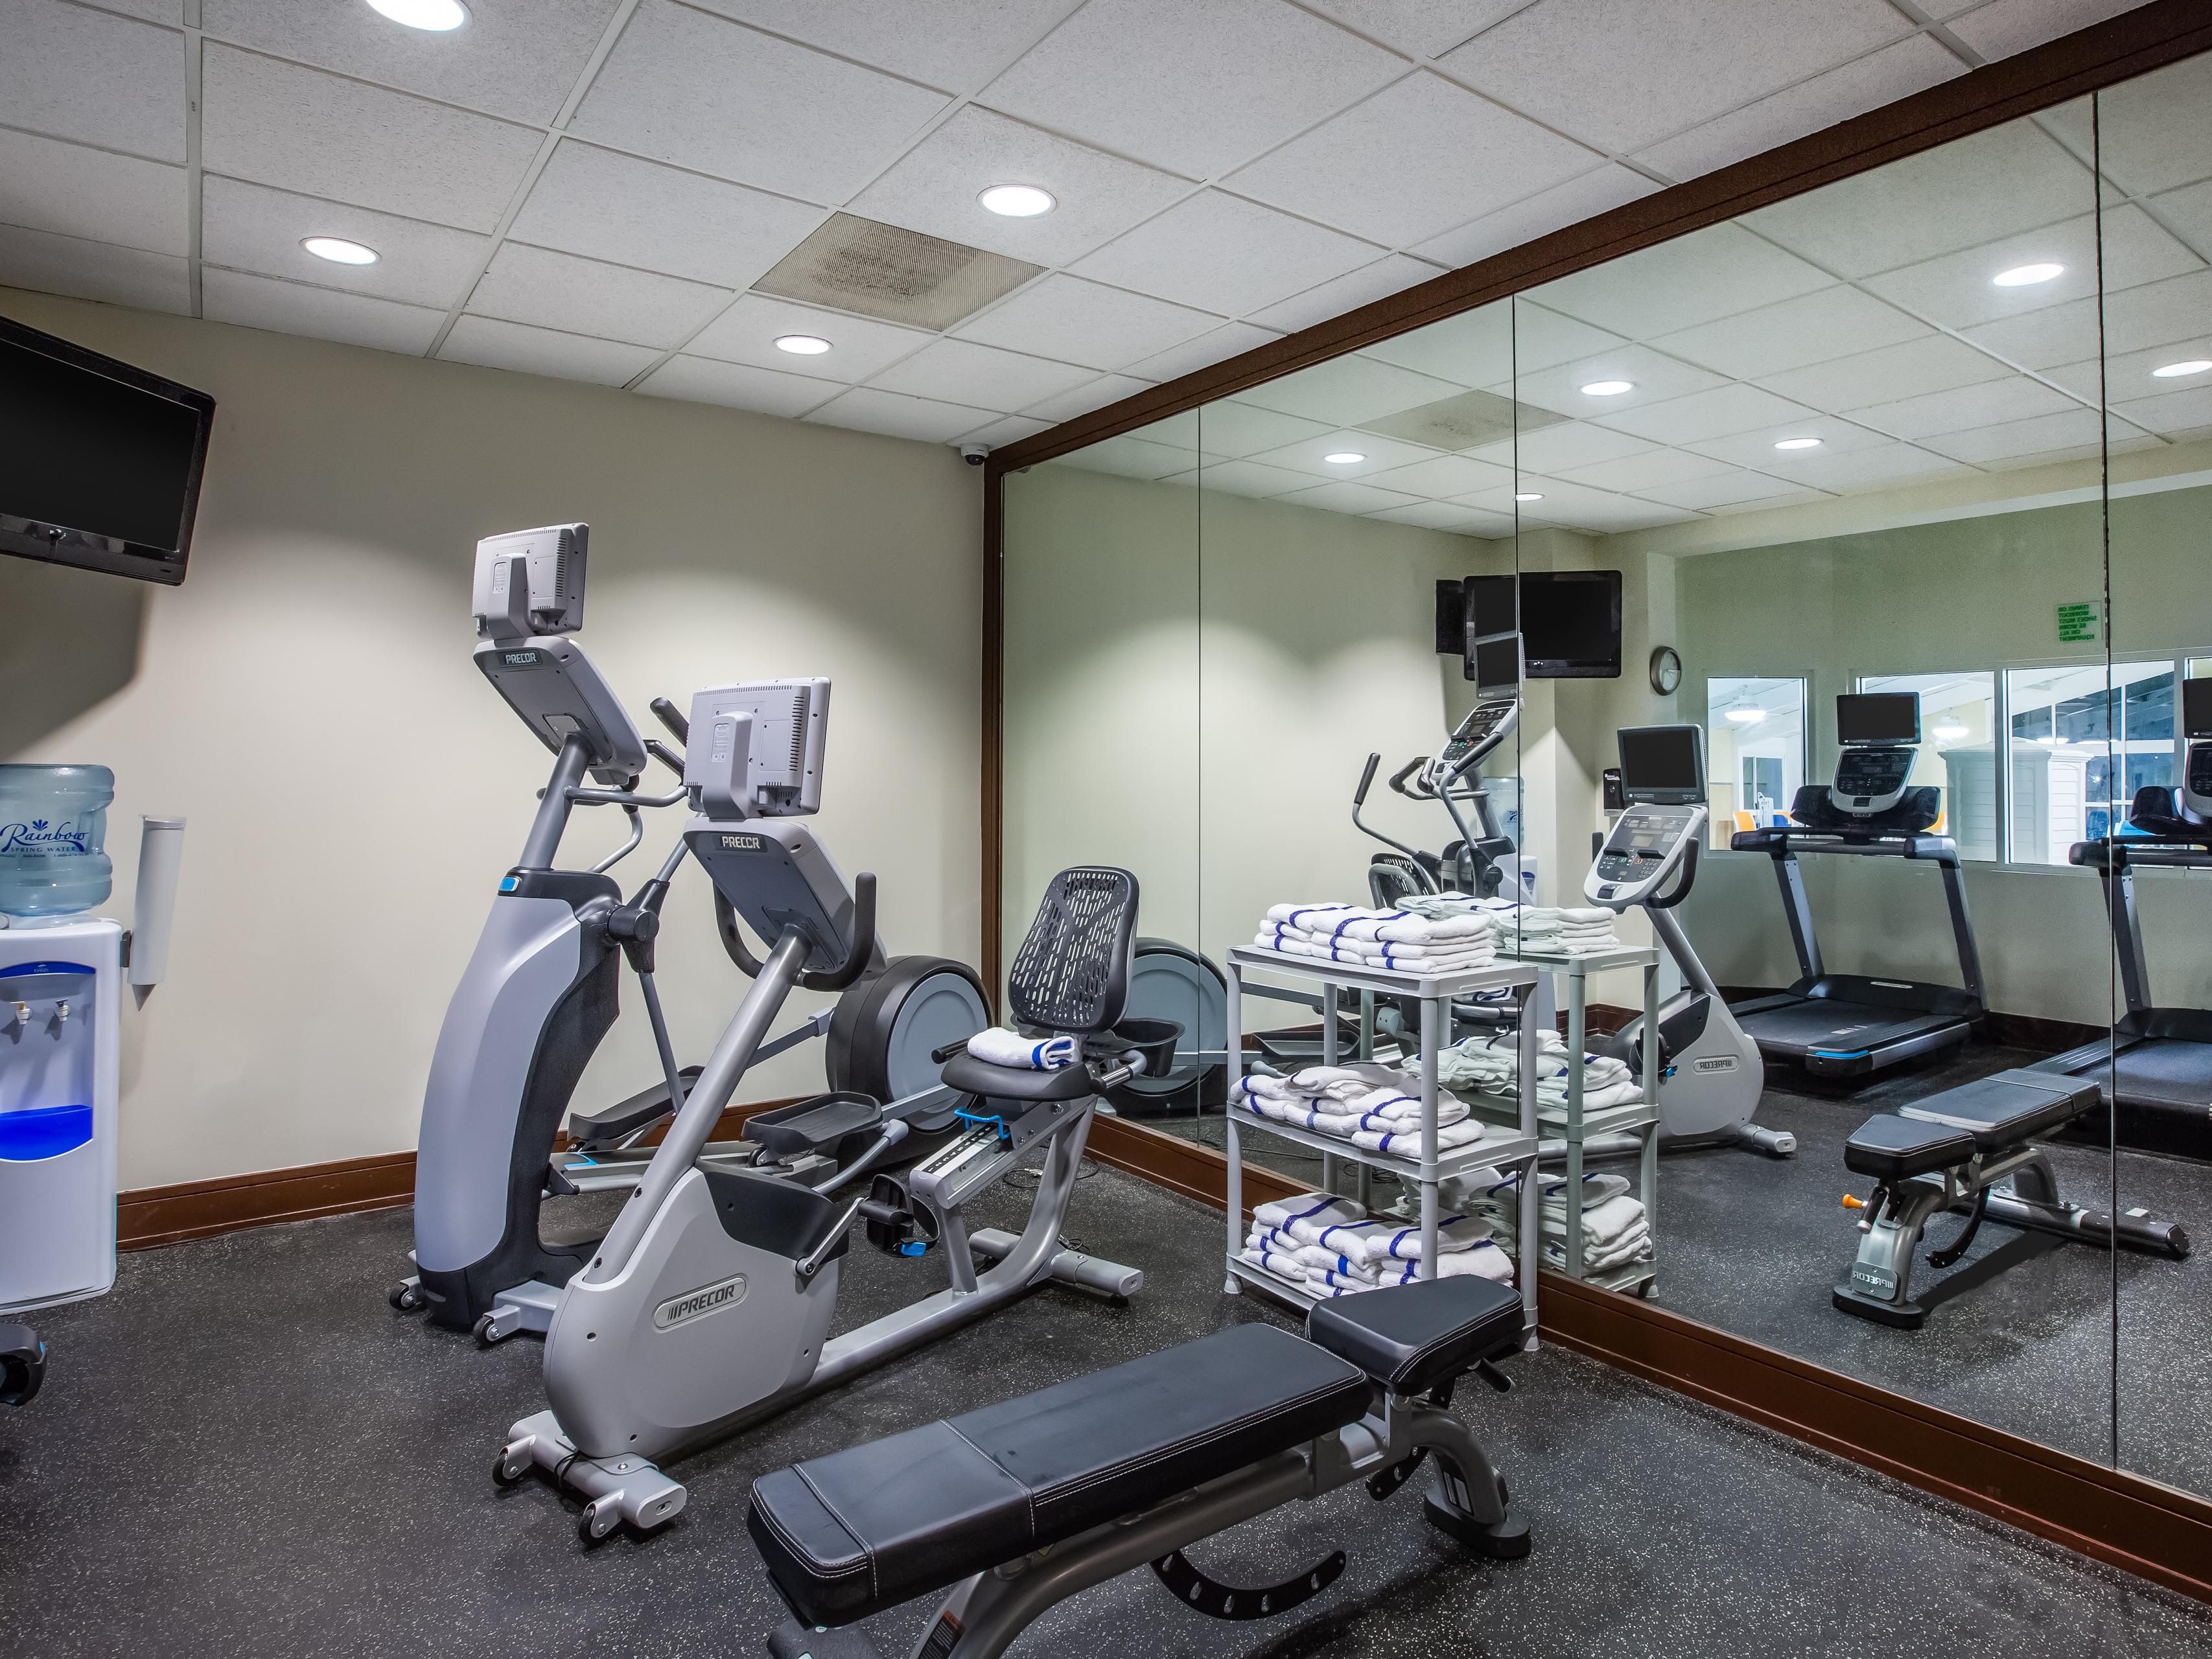 Maintaining your routine while traveling is important, especially when you’re short on time and on the go. We totally get it. Recharge and feel ready for anything with our state of the art fitness center that is open 24 hours a day. 